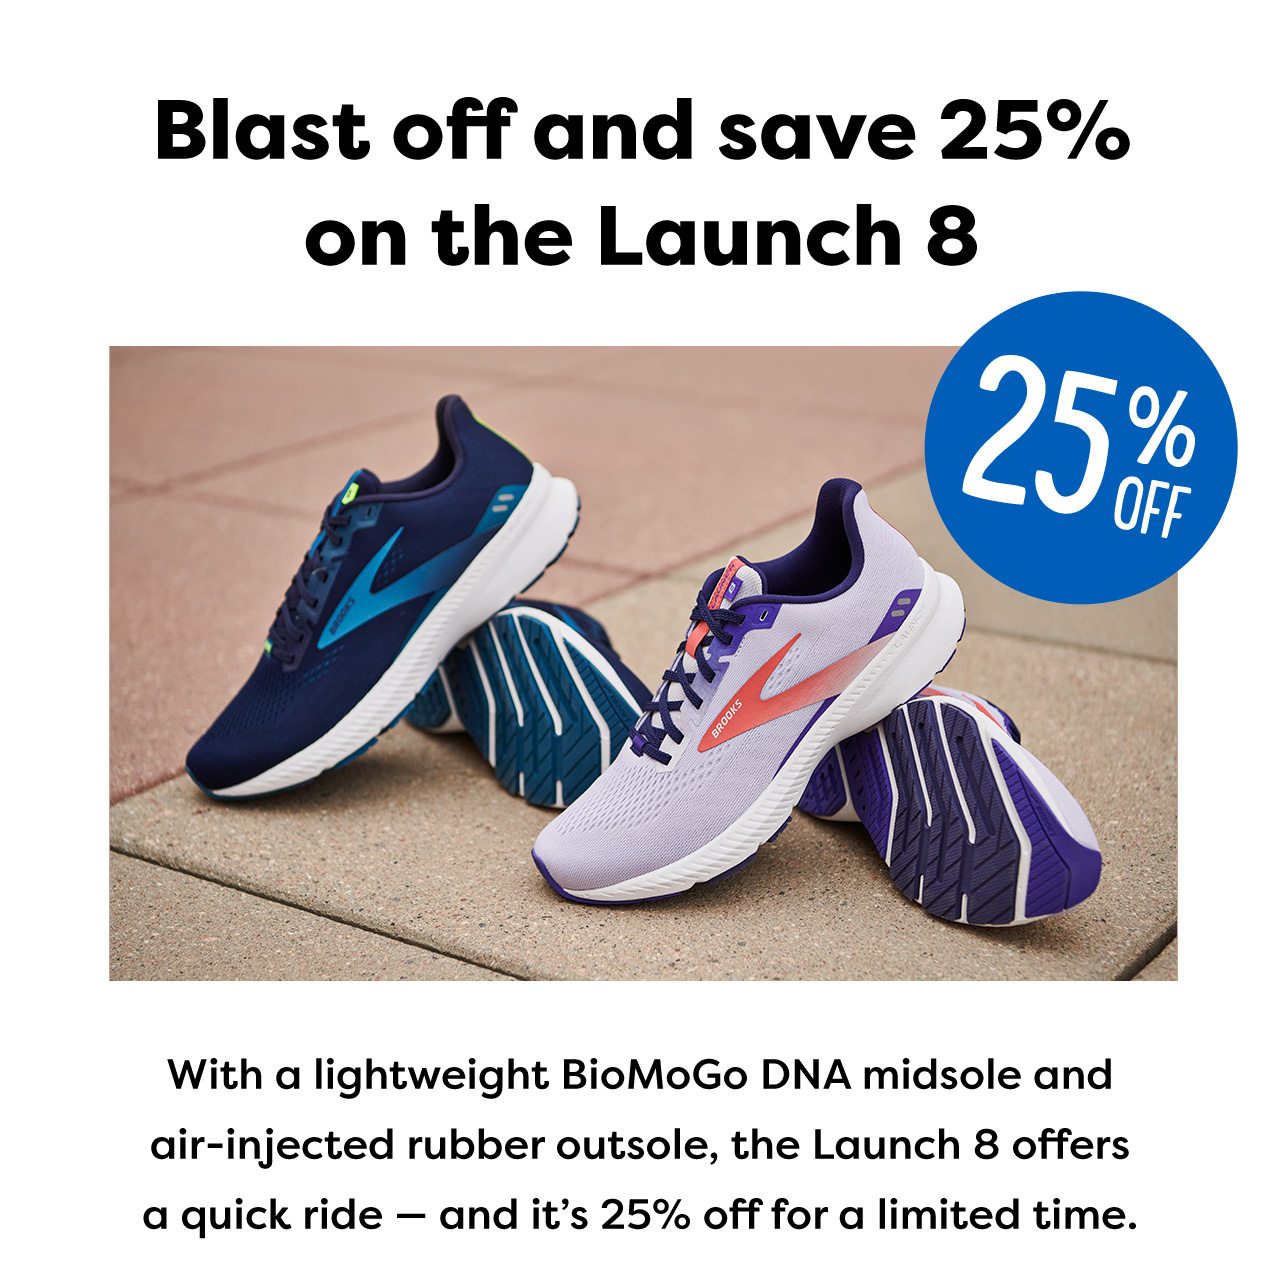 Blast off and save 25% on the Launch 8 - 25% OFF - With a lightweight BioMoGo DNA midsole and air-injected rubber outsole, the Launch 8 offers a quick ride - and it's 25% off for a limited time.